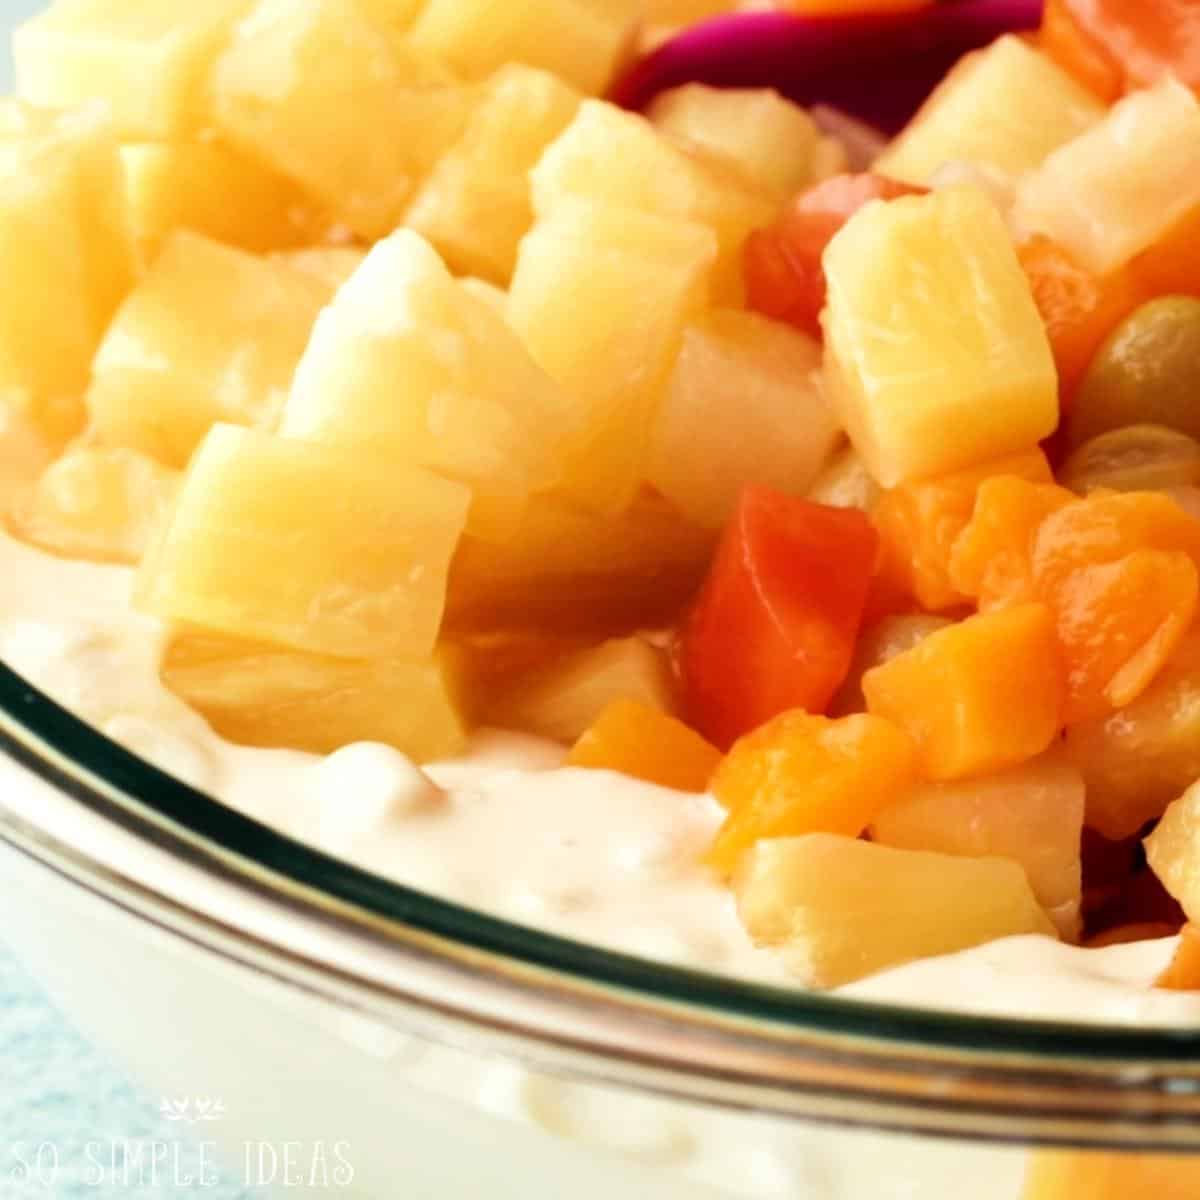 adding canned pineapple and tropical fruit.